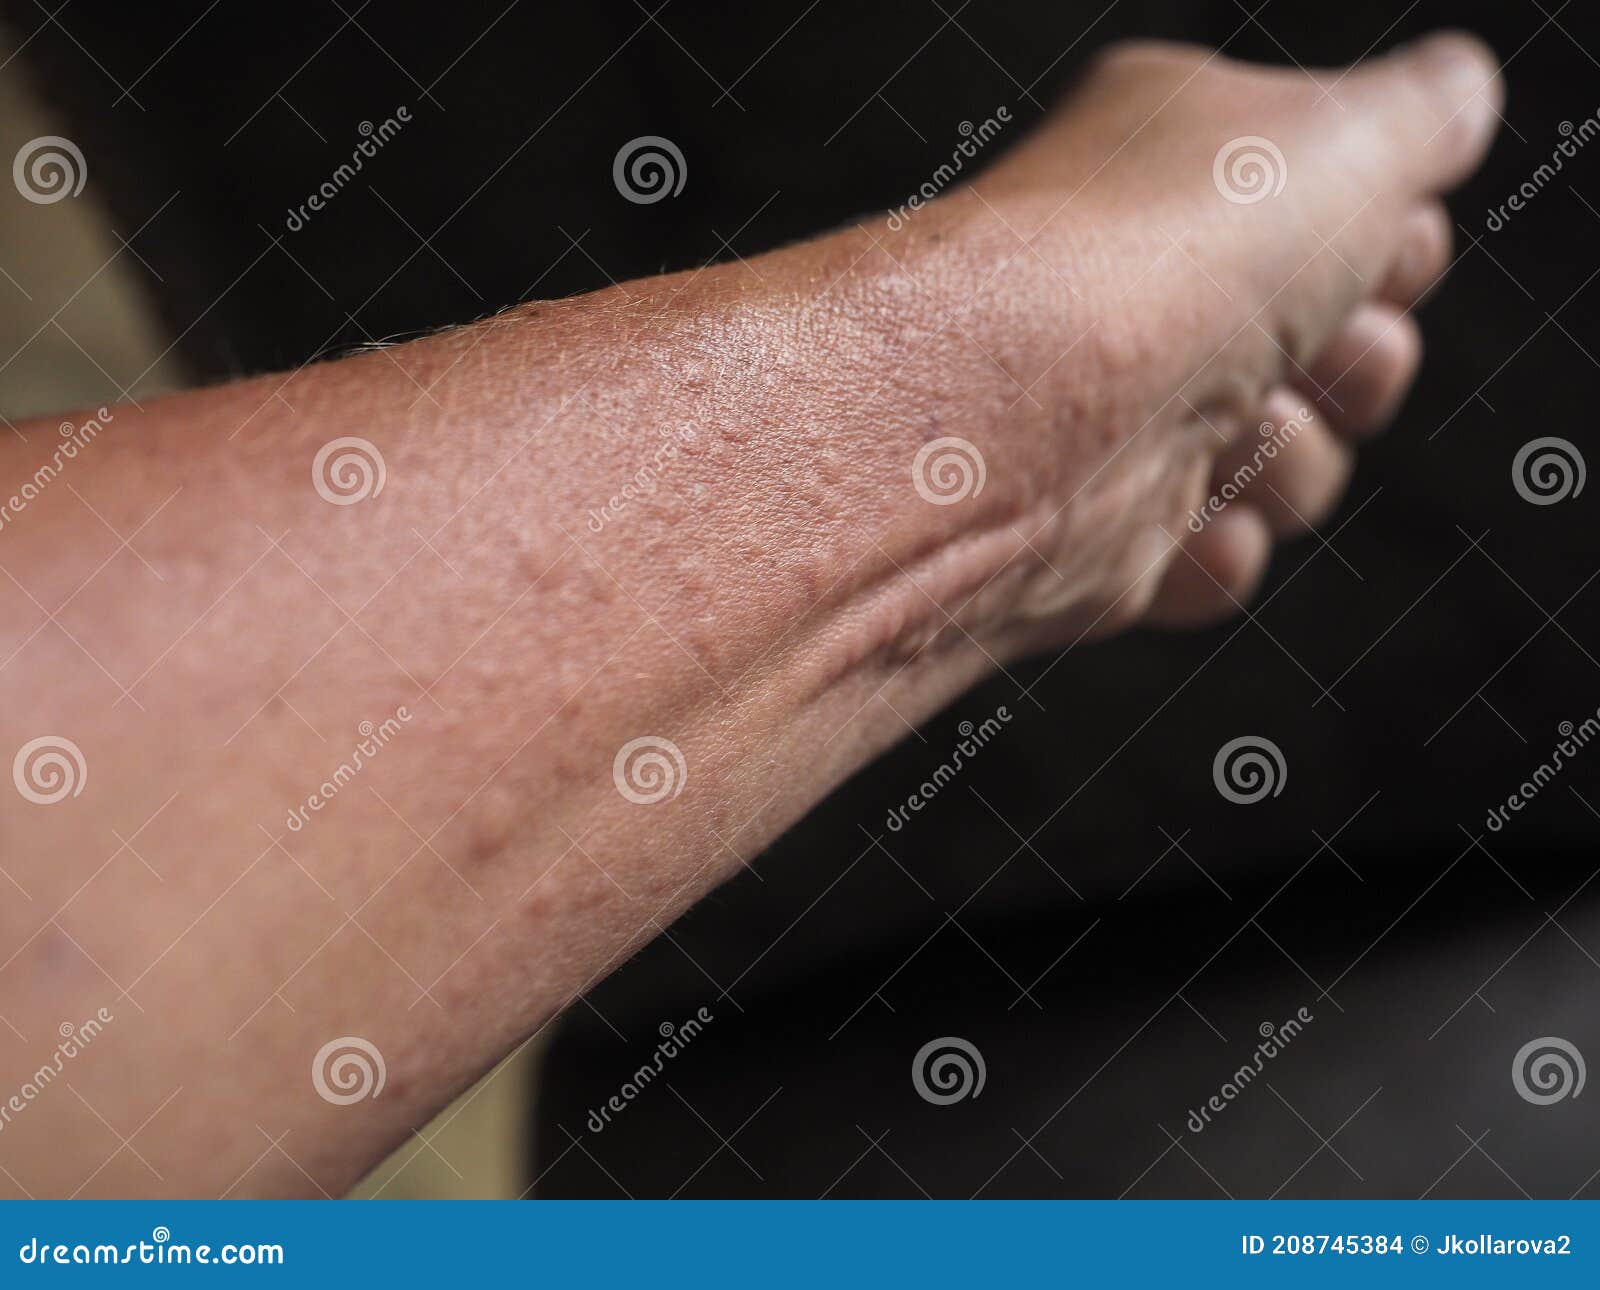 symptoms of contact allergy on hand skin